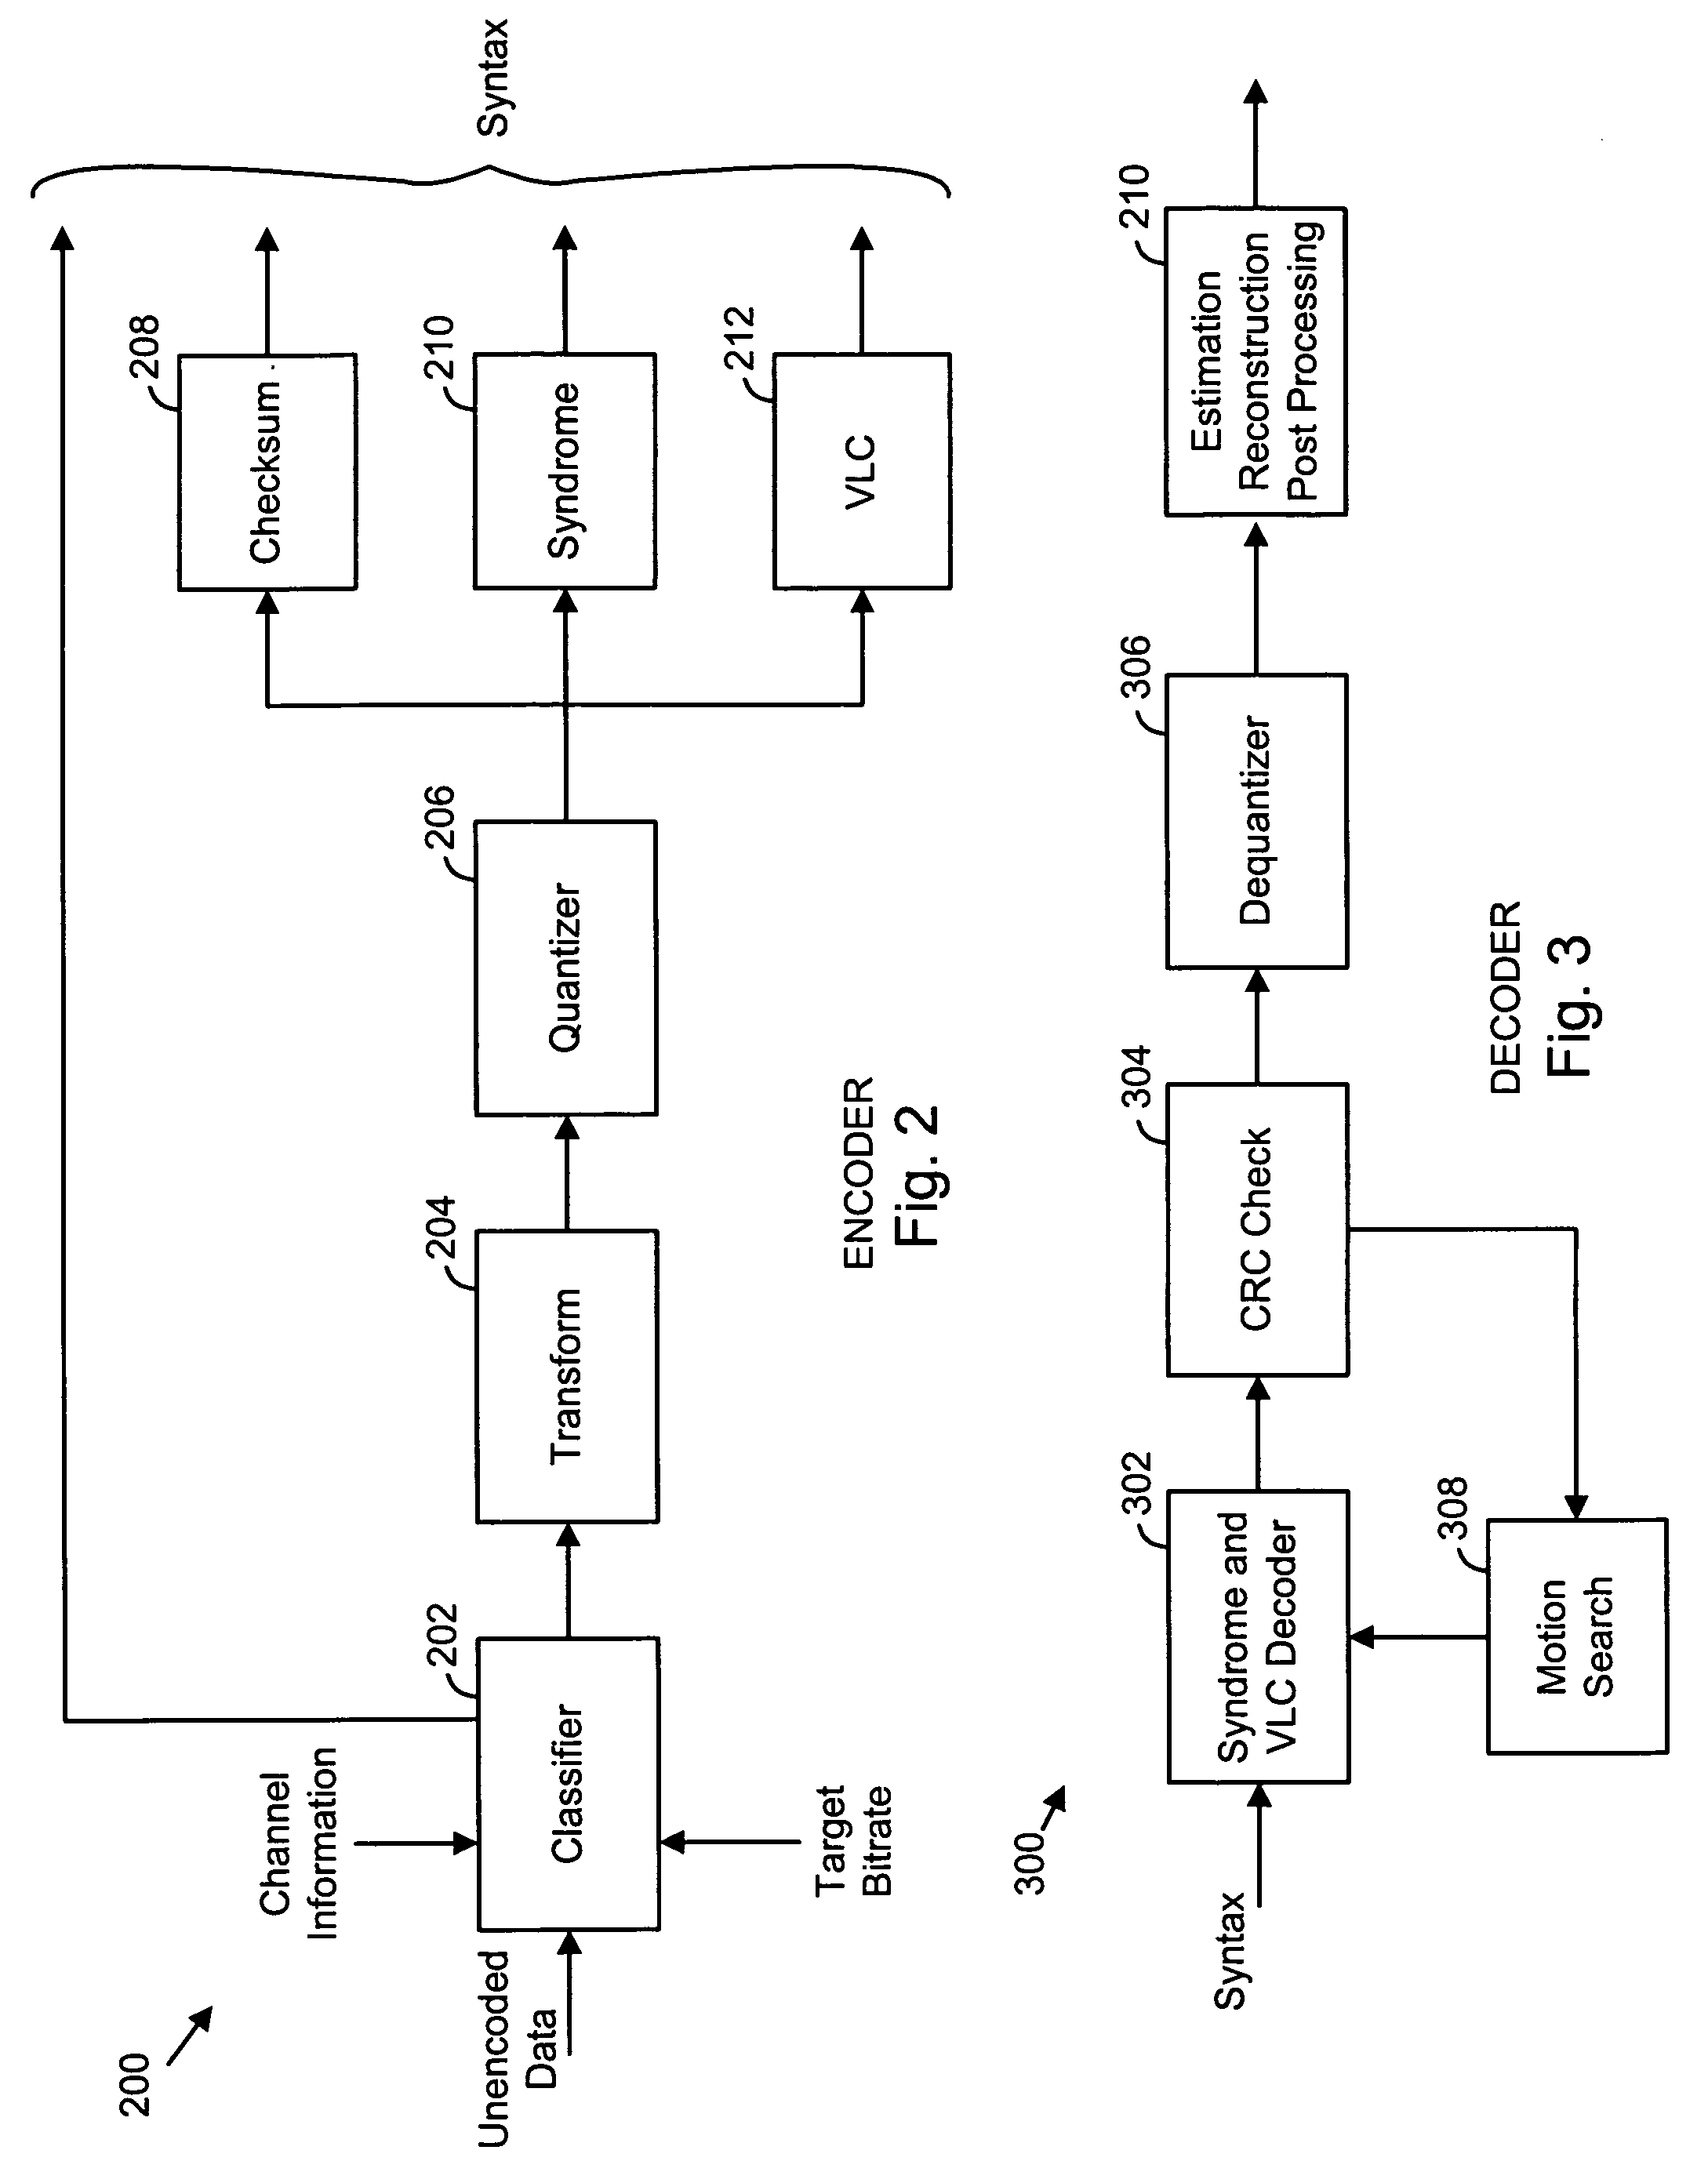 Encoding and decoding of digital data using cues derivable at a decoder